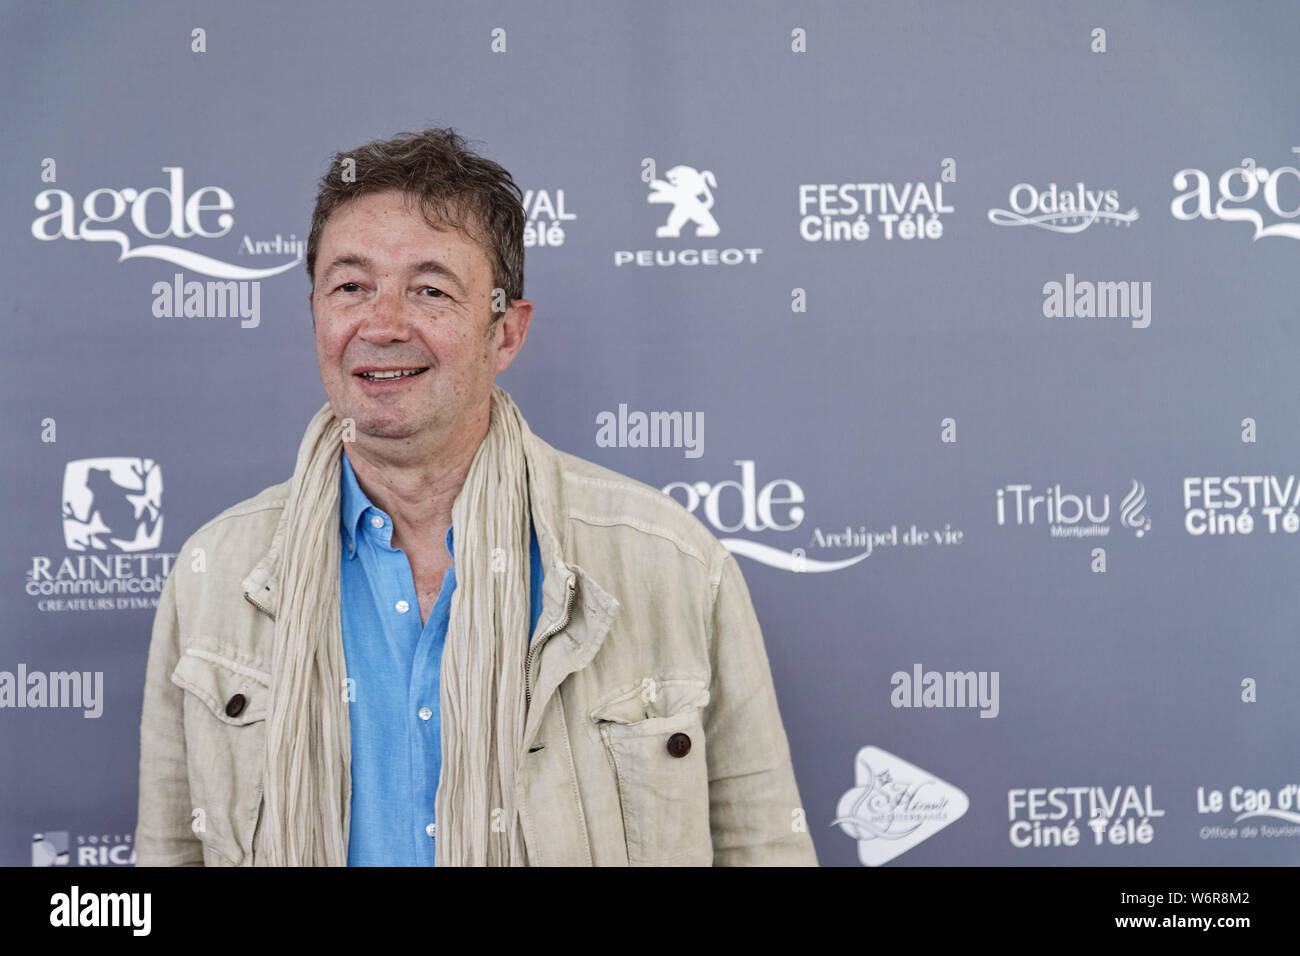 Cap of Agde, France.22th June,2019.Frédéric Bouraly attends The Herault Cinema and Television Festival in Agde,France Stock Photo